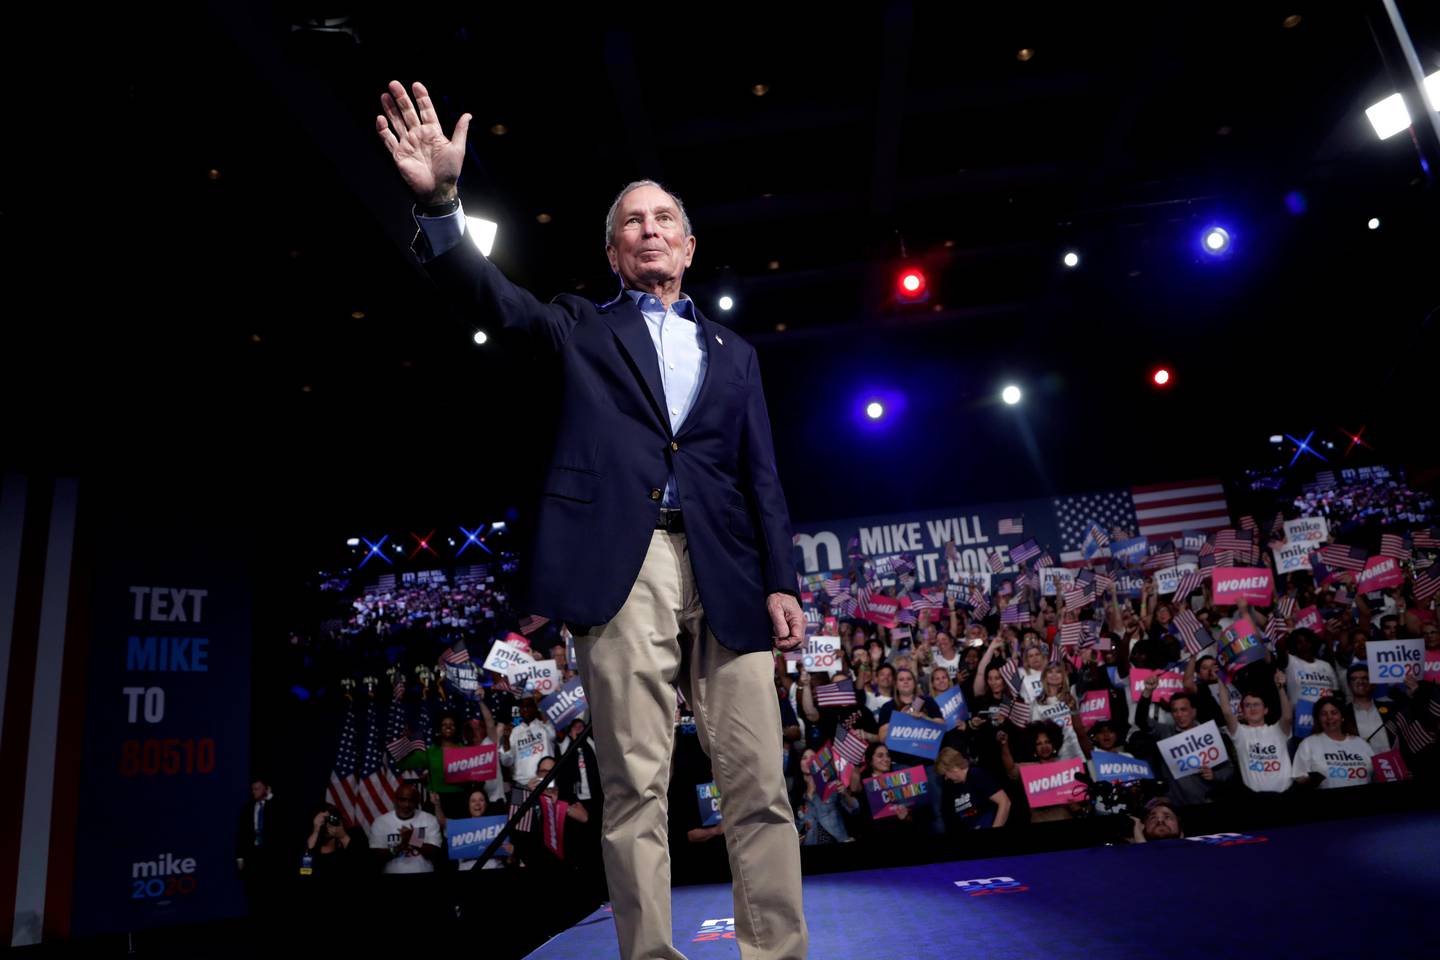 Democratic presidential candidate and former New York City Mayor Mike Bloomberg waves during a primary election night rally, Tuesday, March 3, 2020, in West Palm Beach, Fla. (AP Photo/Lynne Sladky)